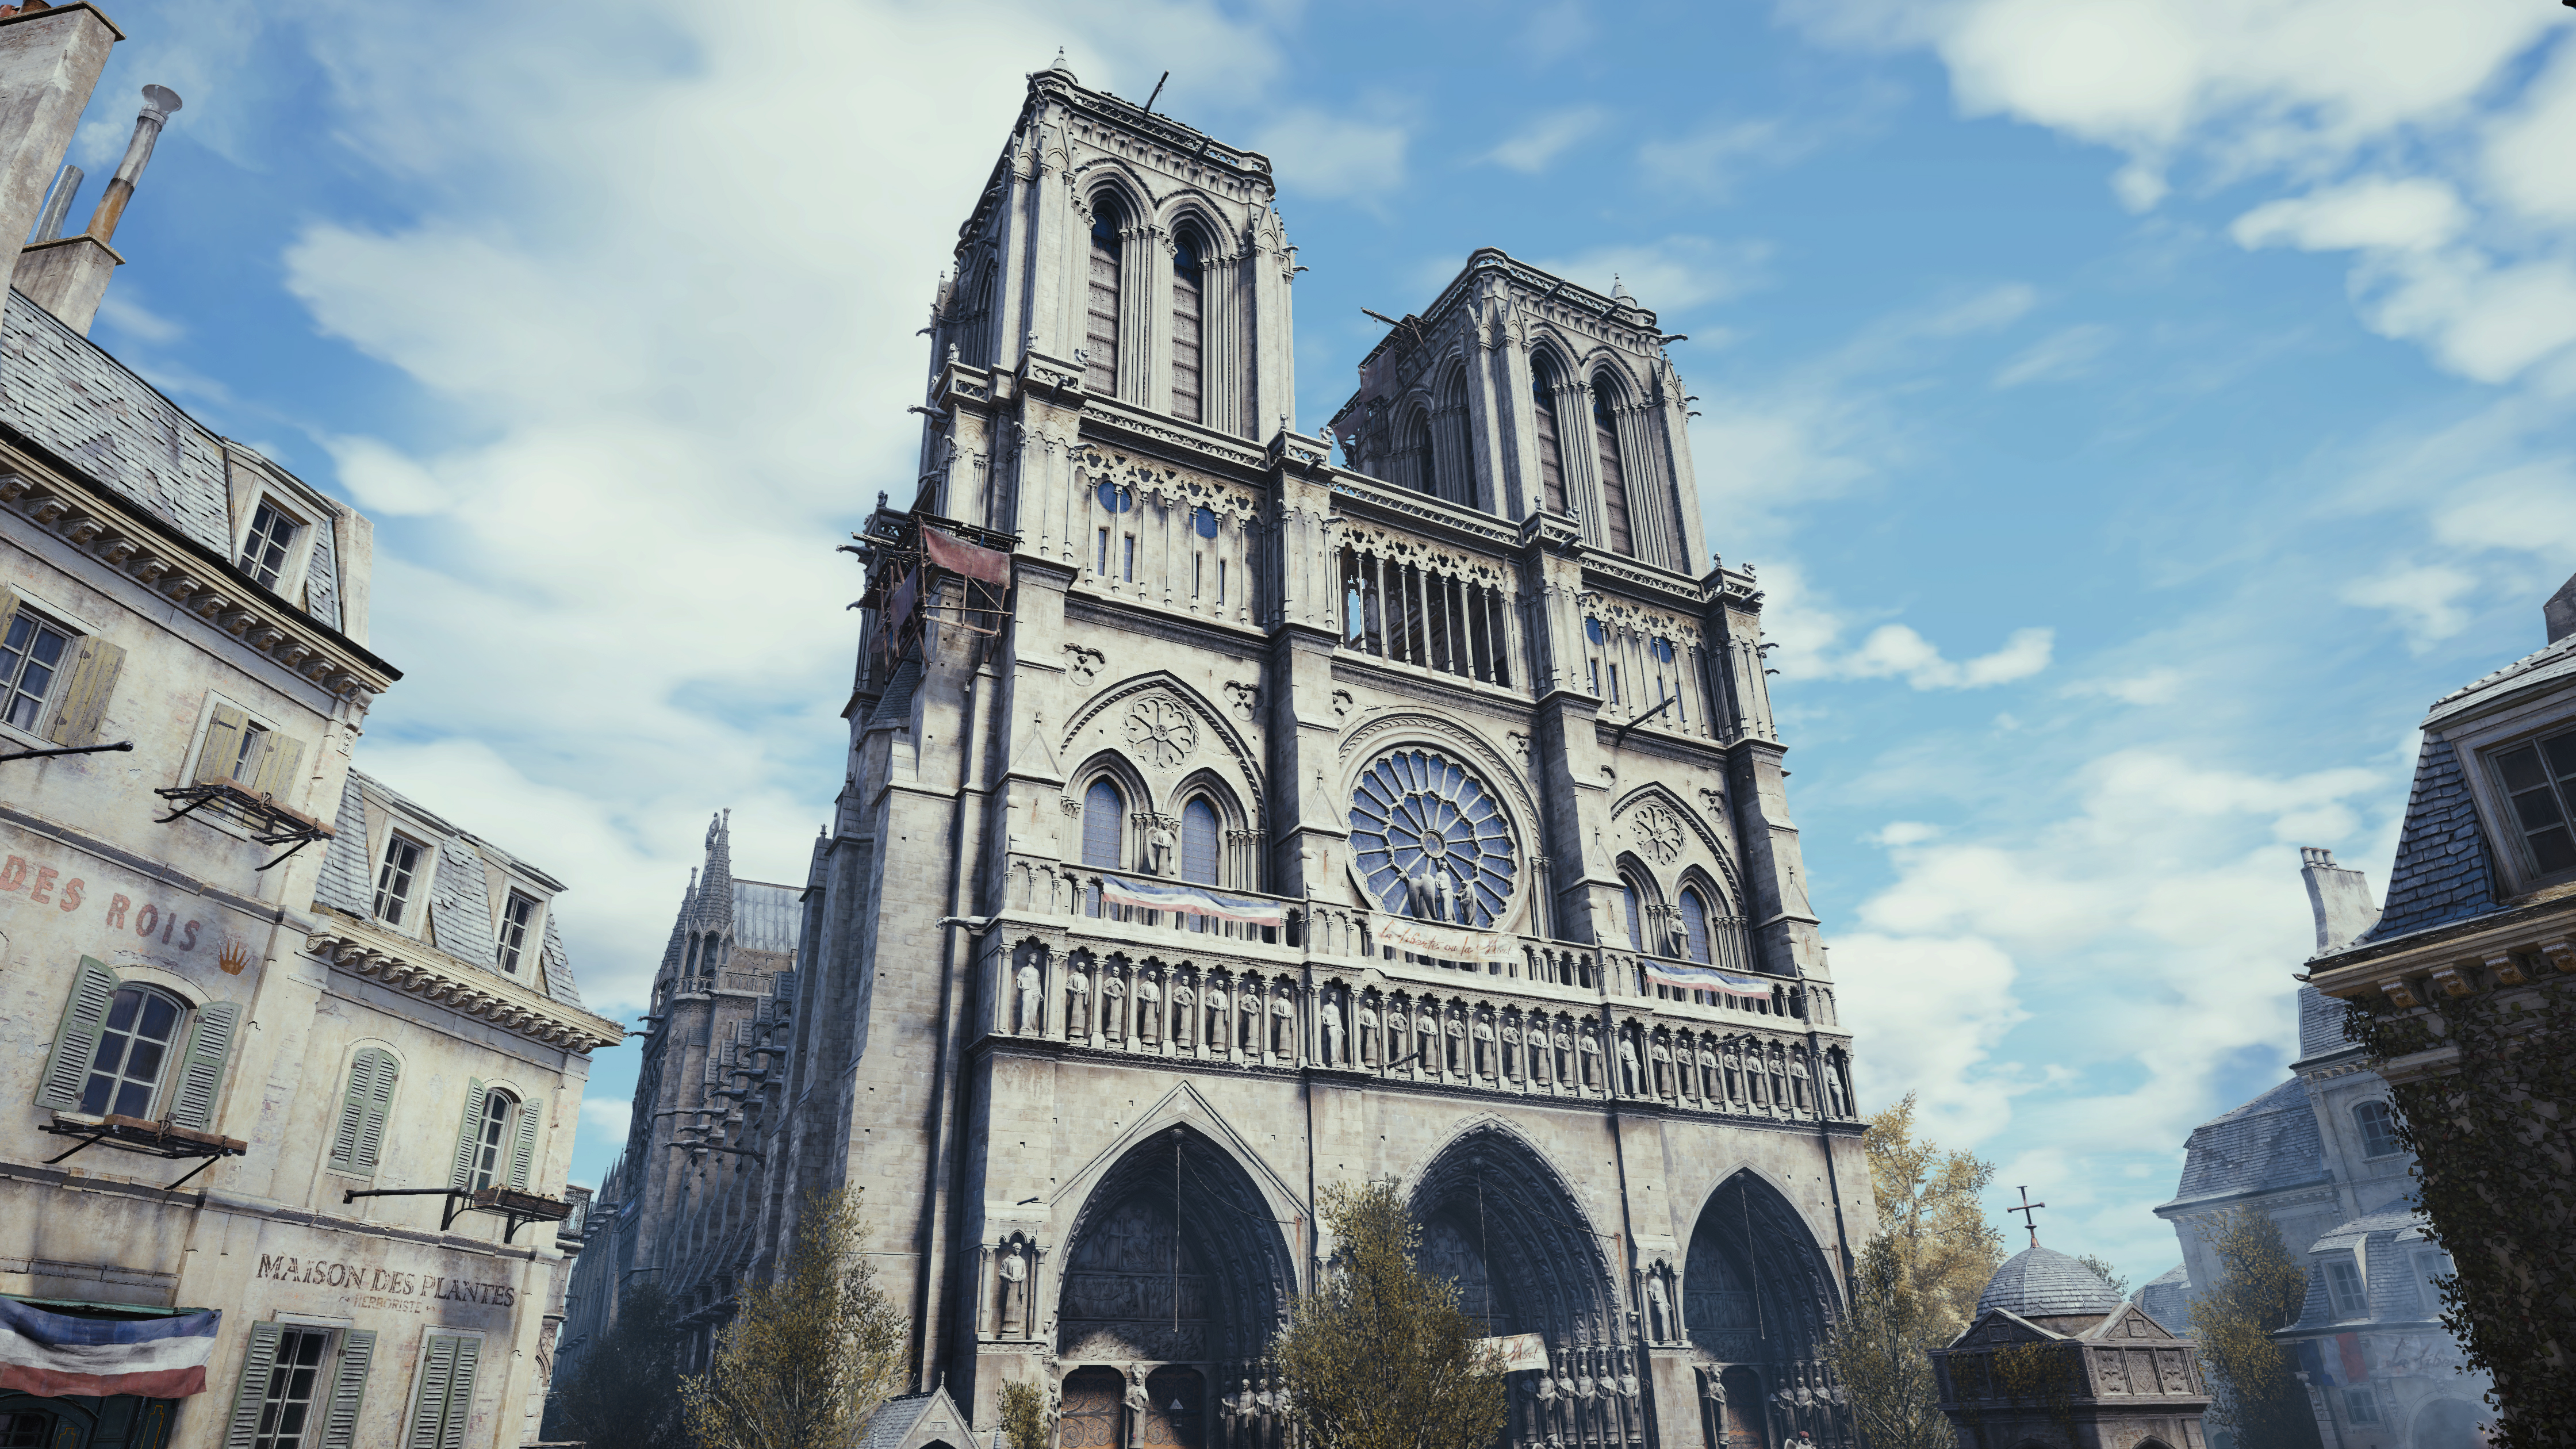 change weapons on assasins creed unity pc